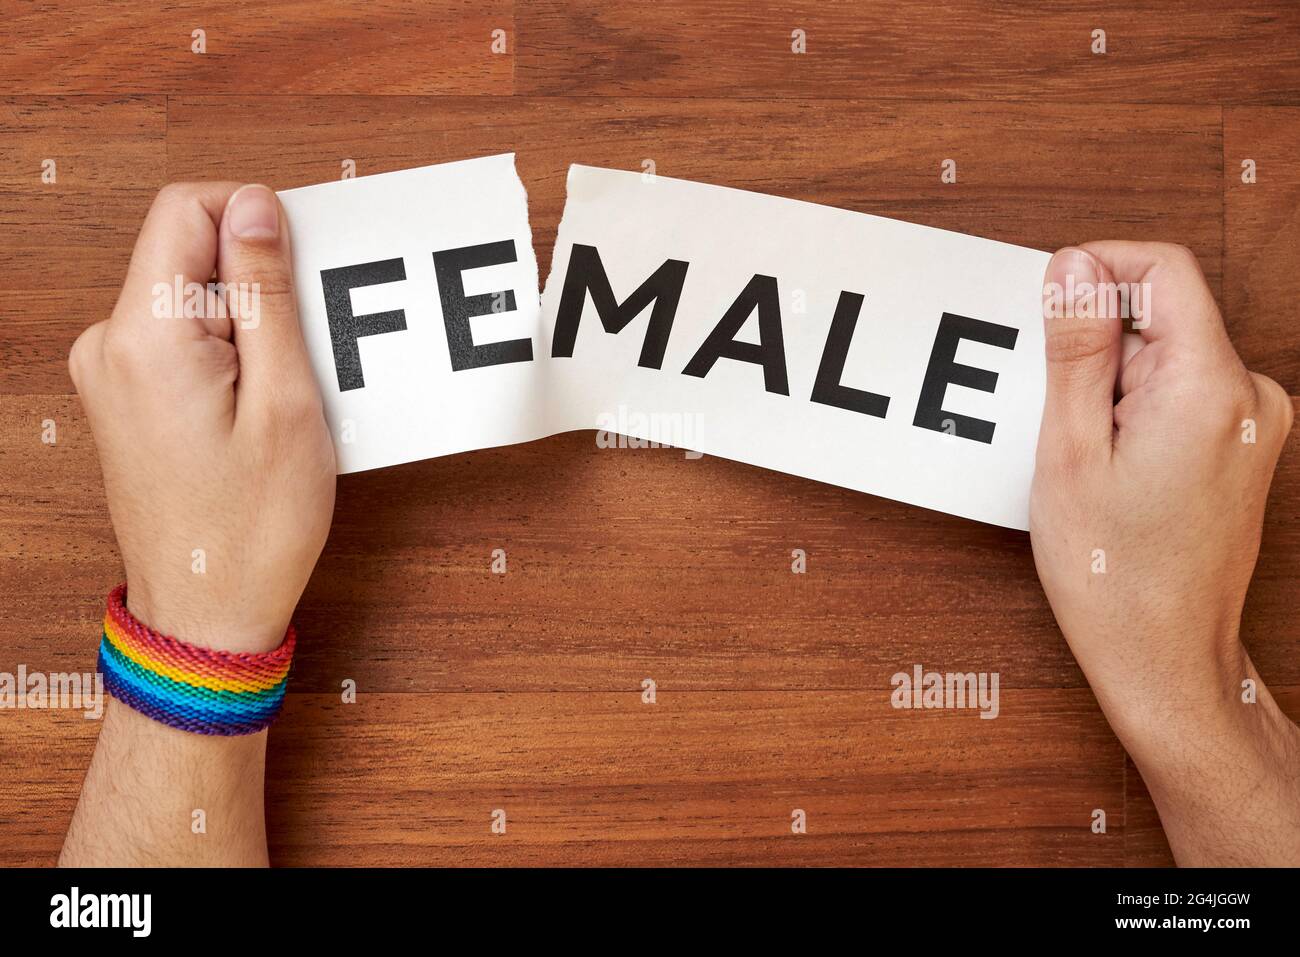 Hands ripping the word female, leaving male, wearing a rainbow bracelet, lgbt symbol. Conceptual image about gender identity and transgender. Wood bac Stock Photo